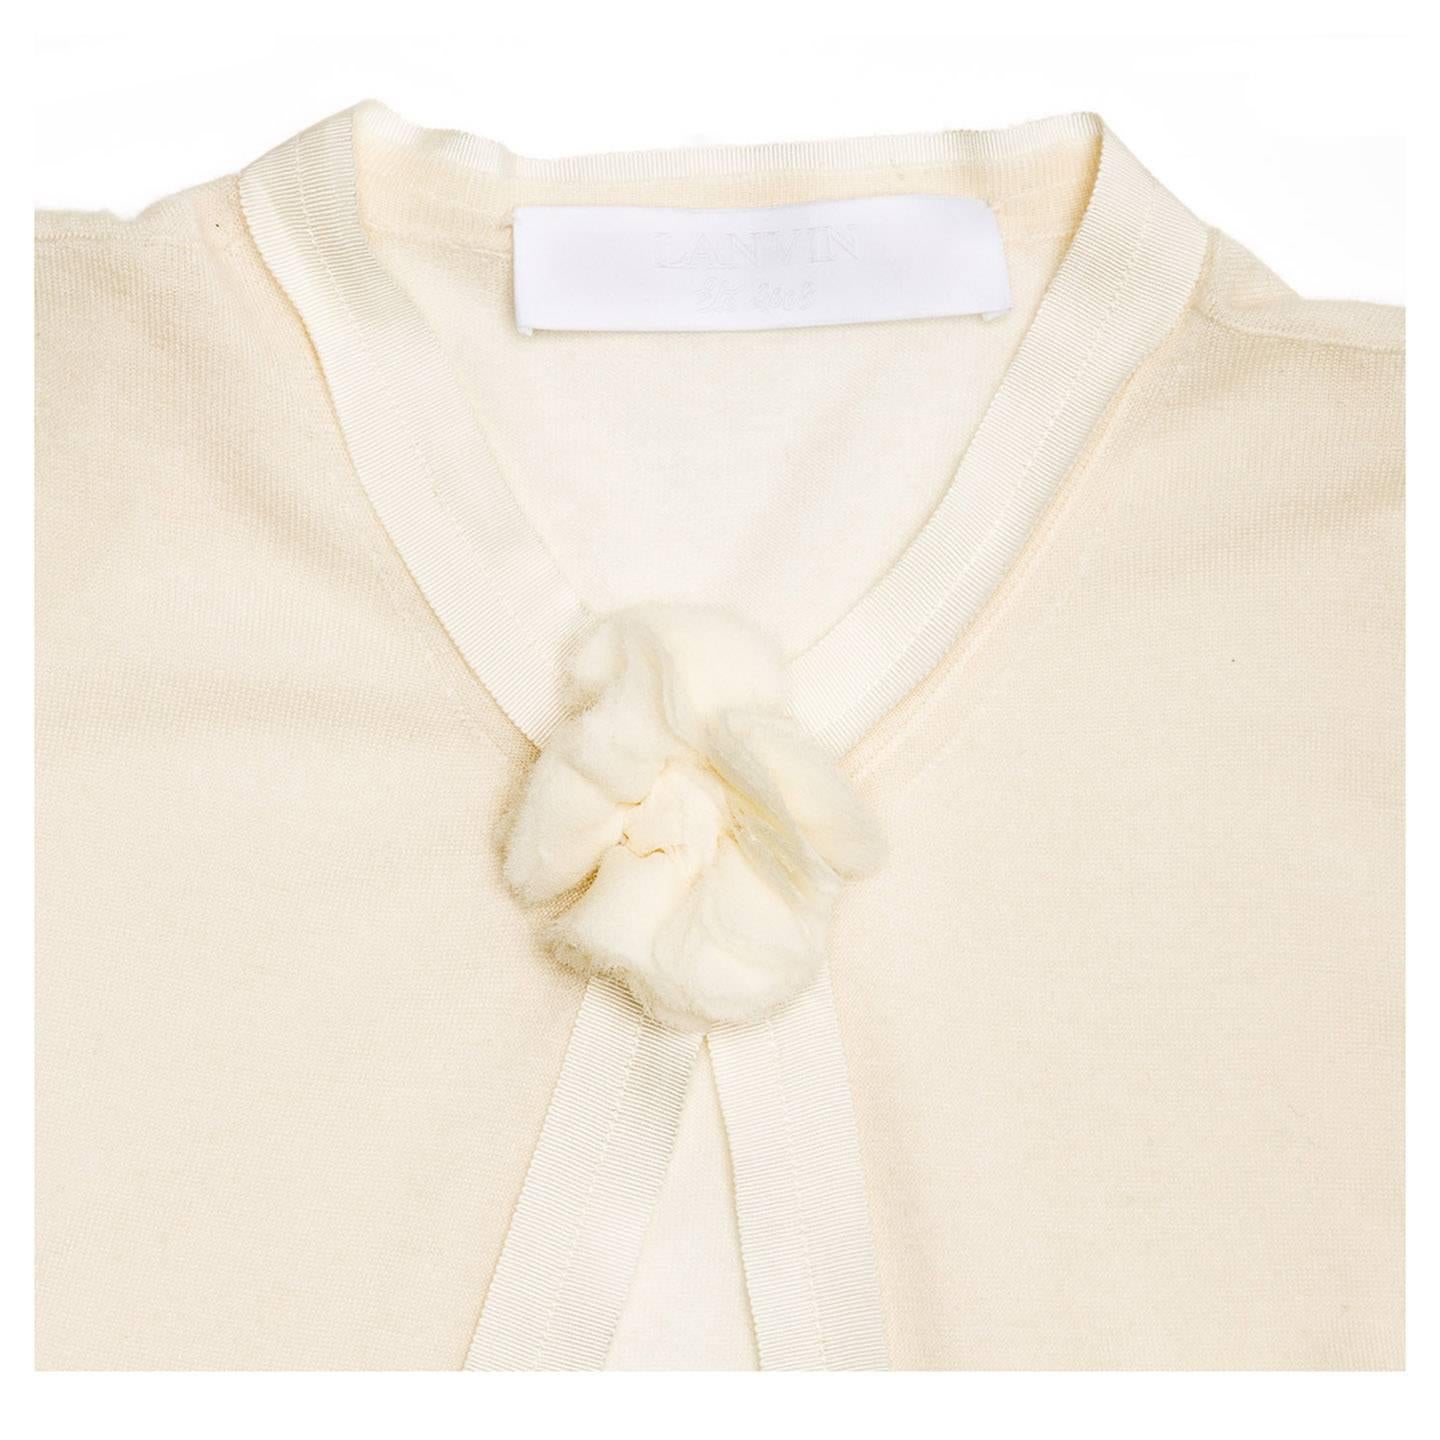 Lanvin Ivory Cashmere Cardigan In Excellent Condition For Sale In Brooklyn, NY